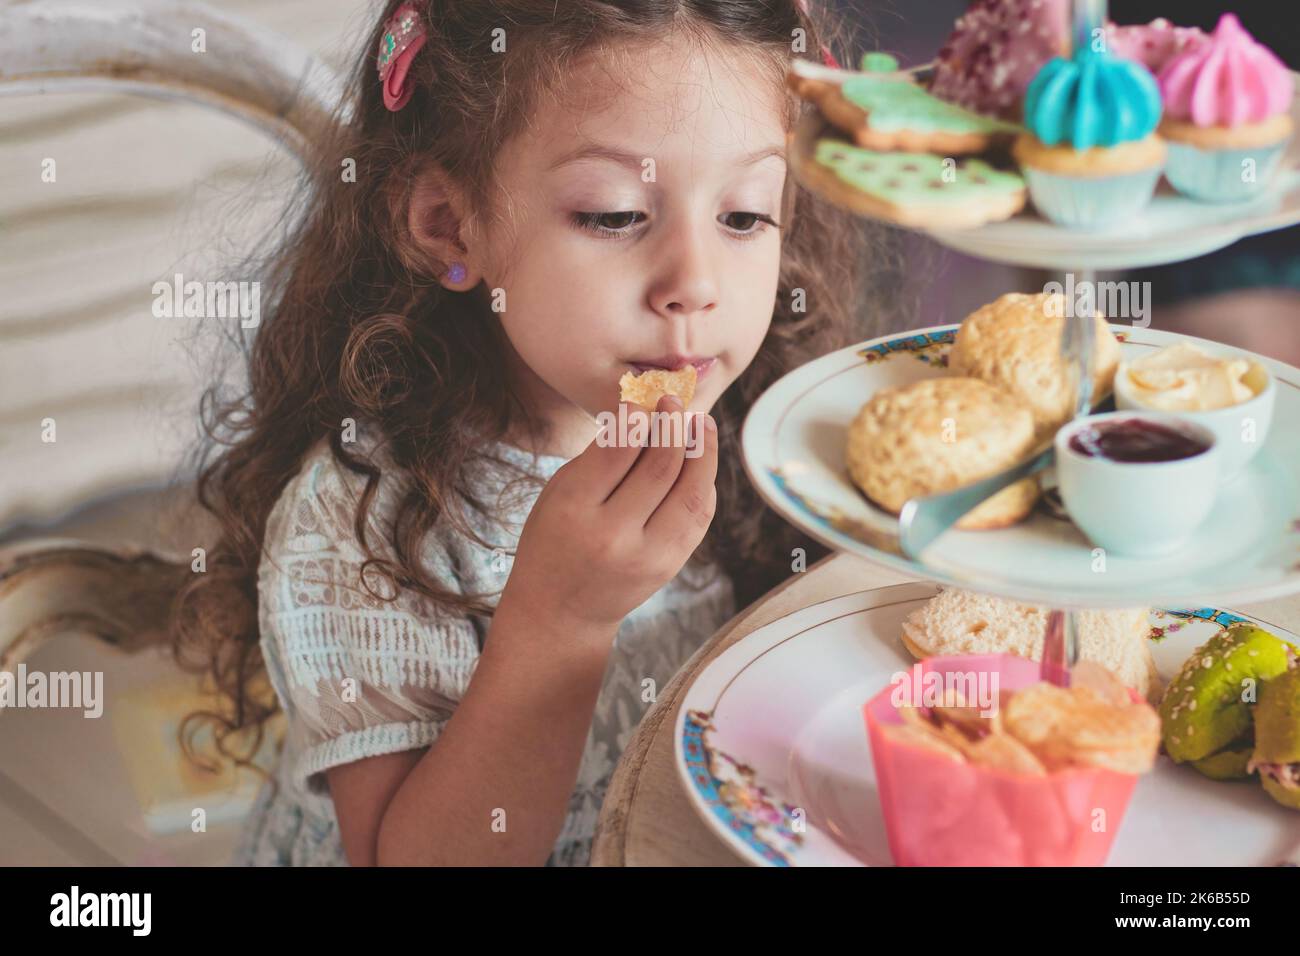 A cute little girl enjoying high tea with ceramic tiered plate stand with scones, cupcakes, sandwiches and crisps Stock Photo